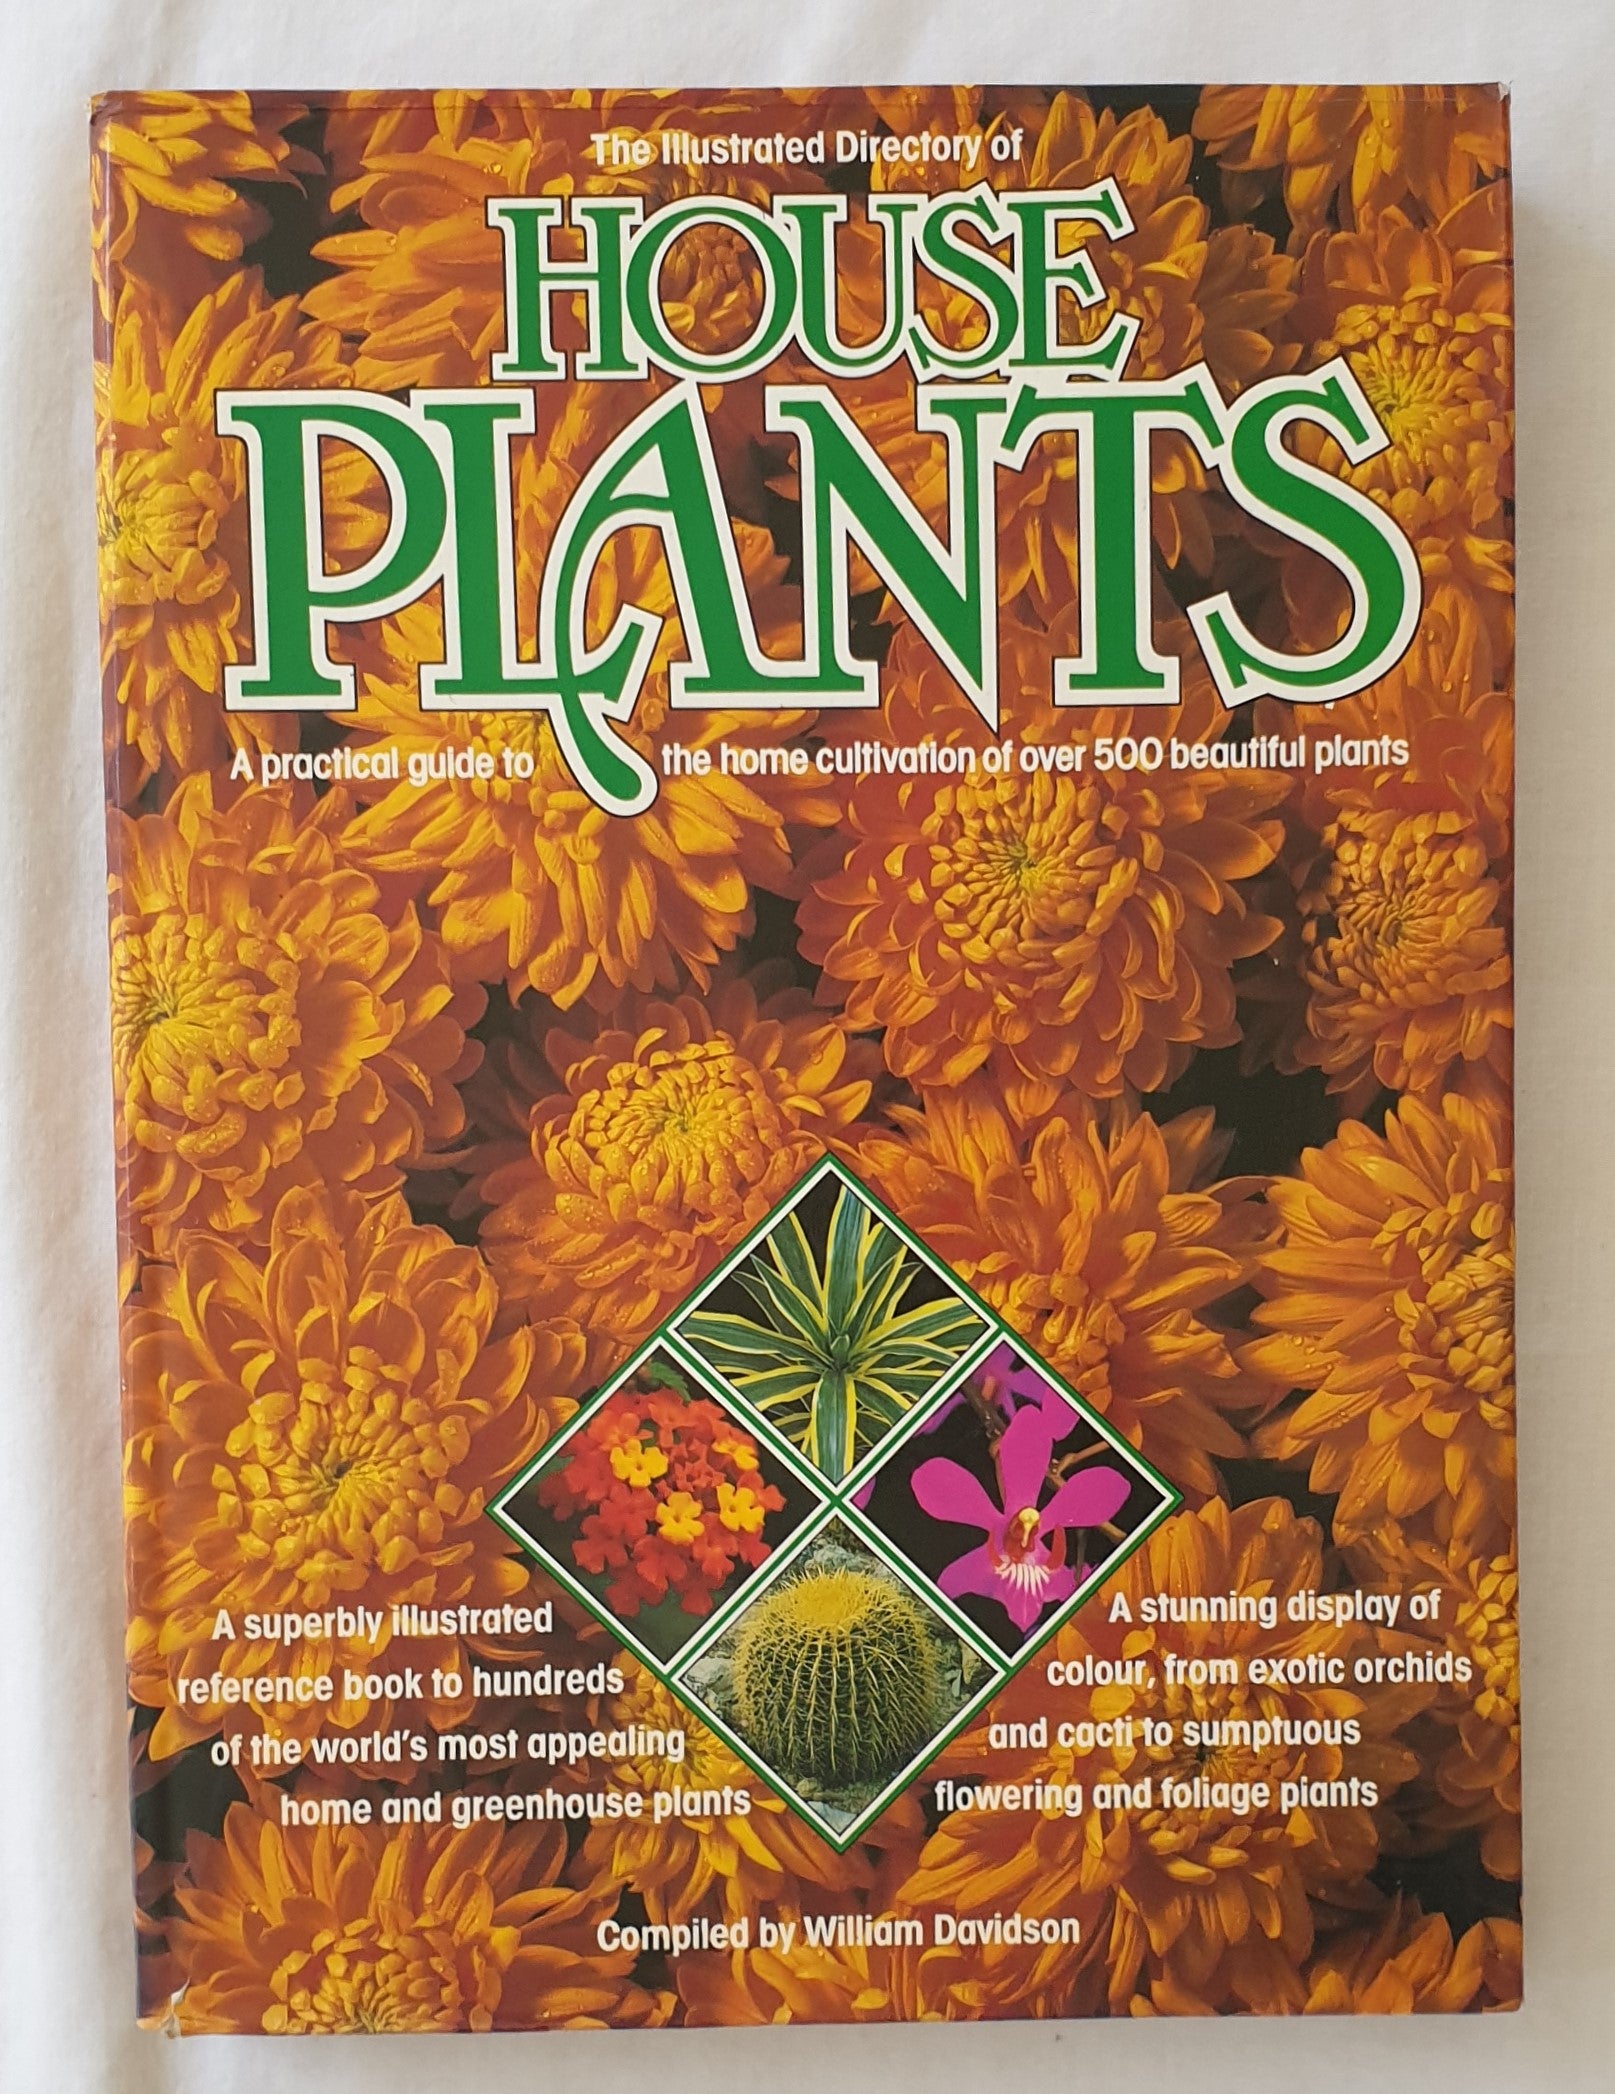 The Illustrated Directory of House Plants  A practical guide to the home cultivation of over 500 beautiful plants  Compiled by William Davidson